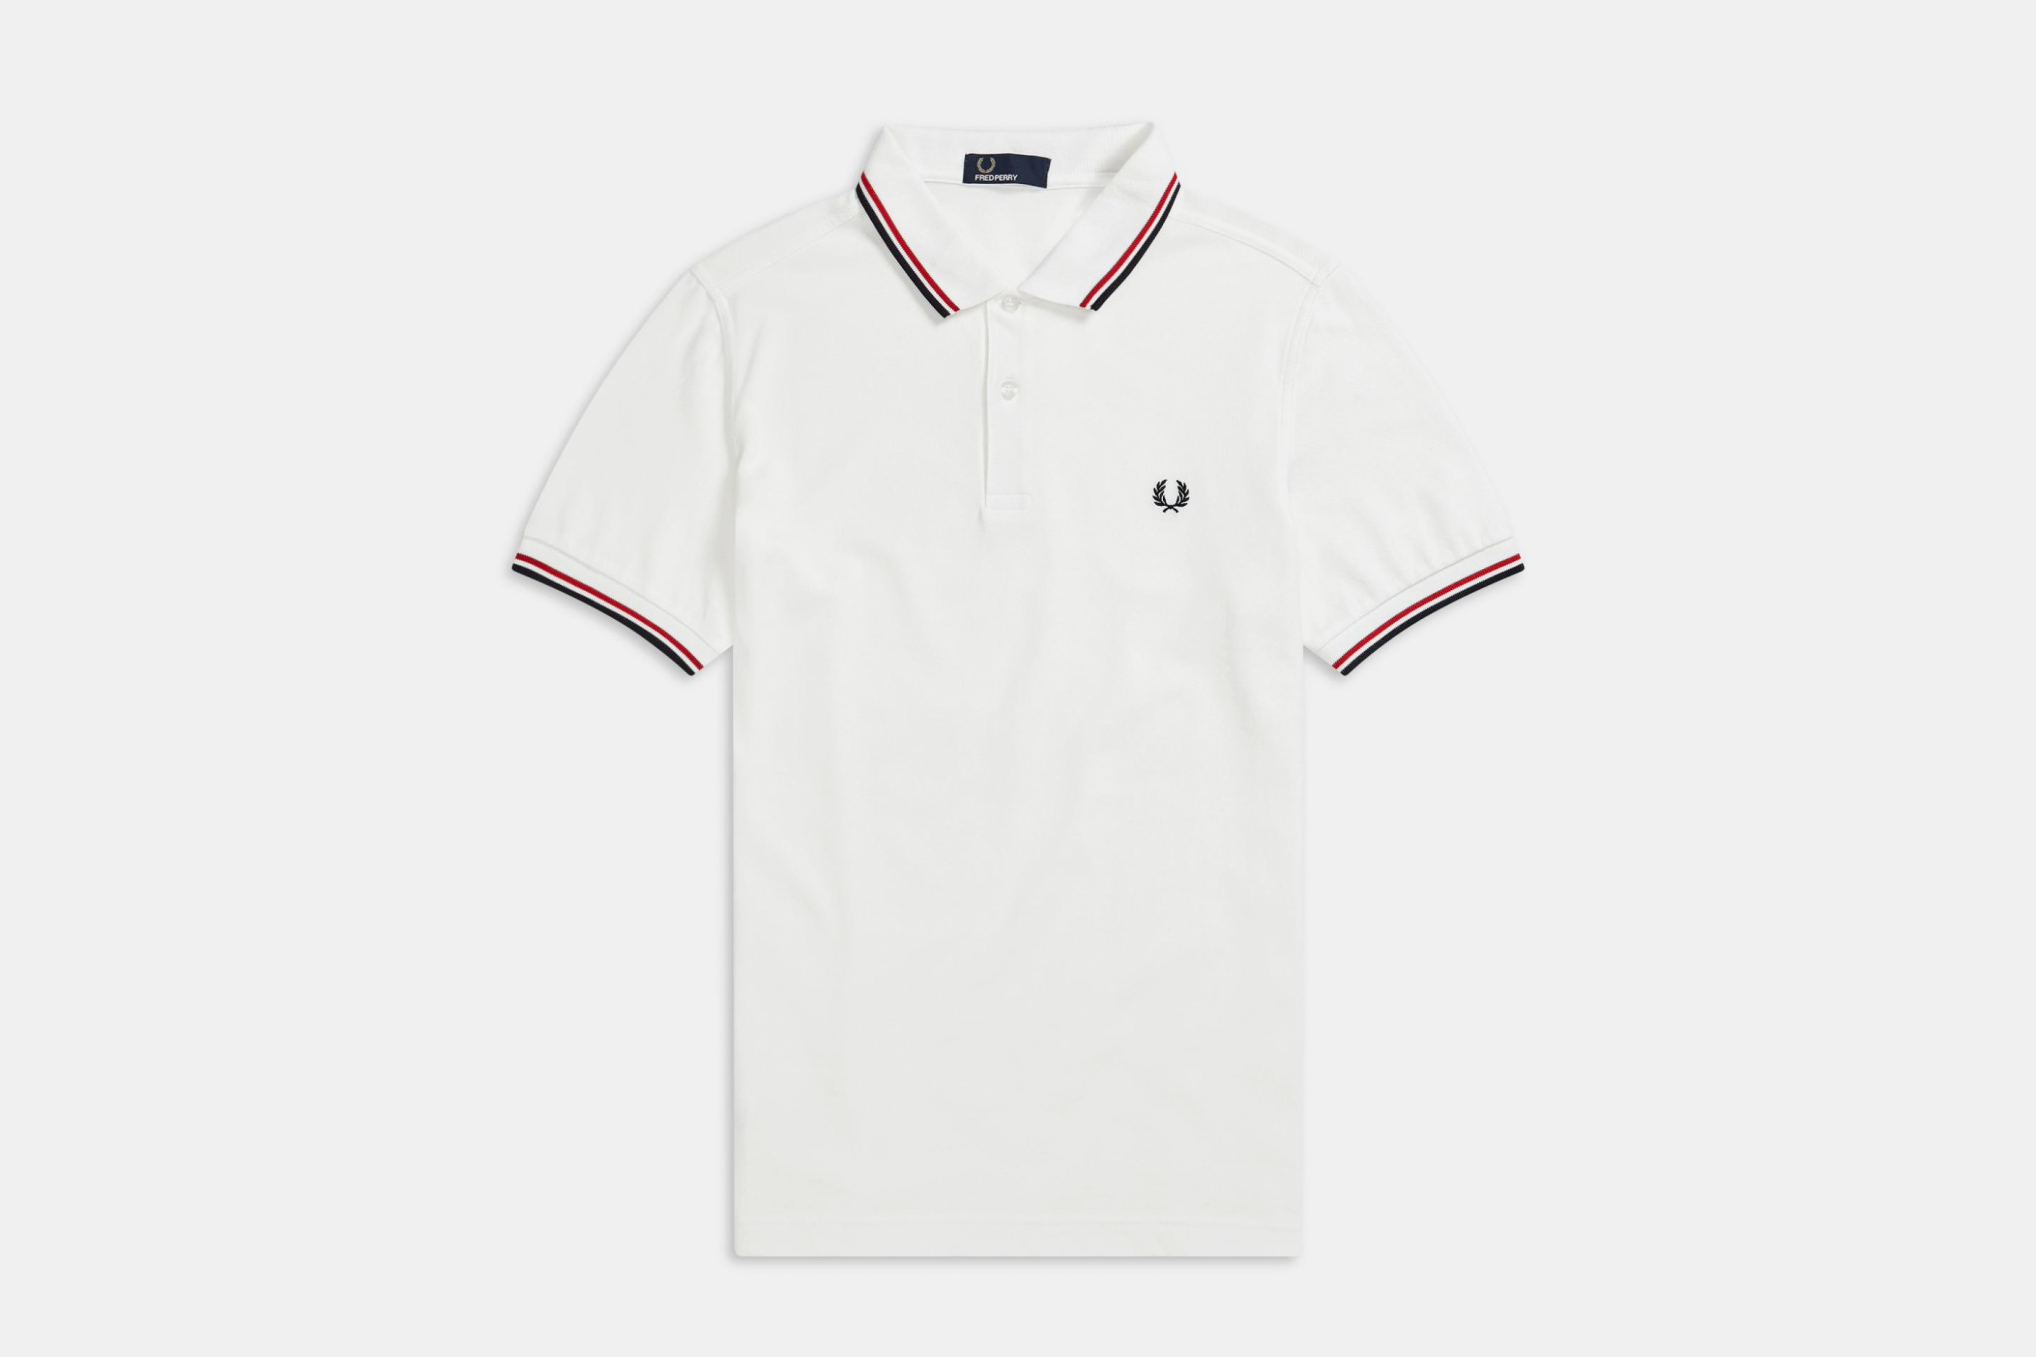 fred perry or lacoste